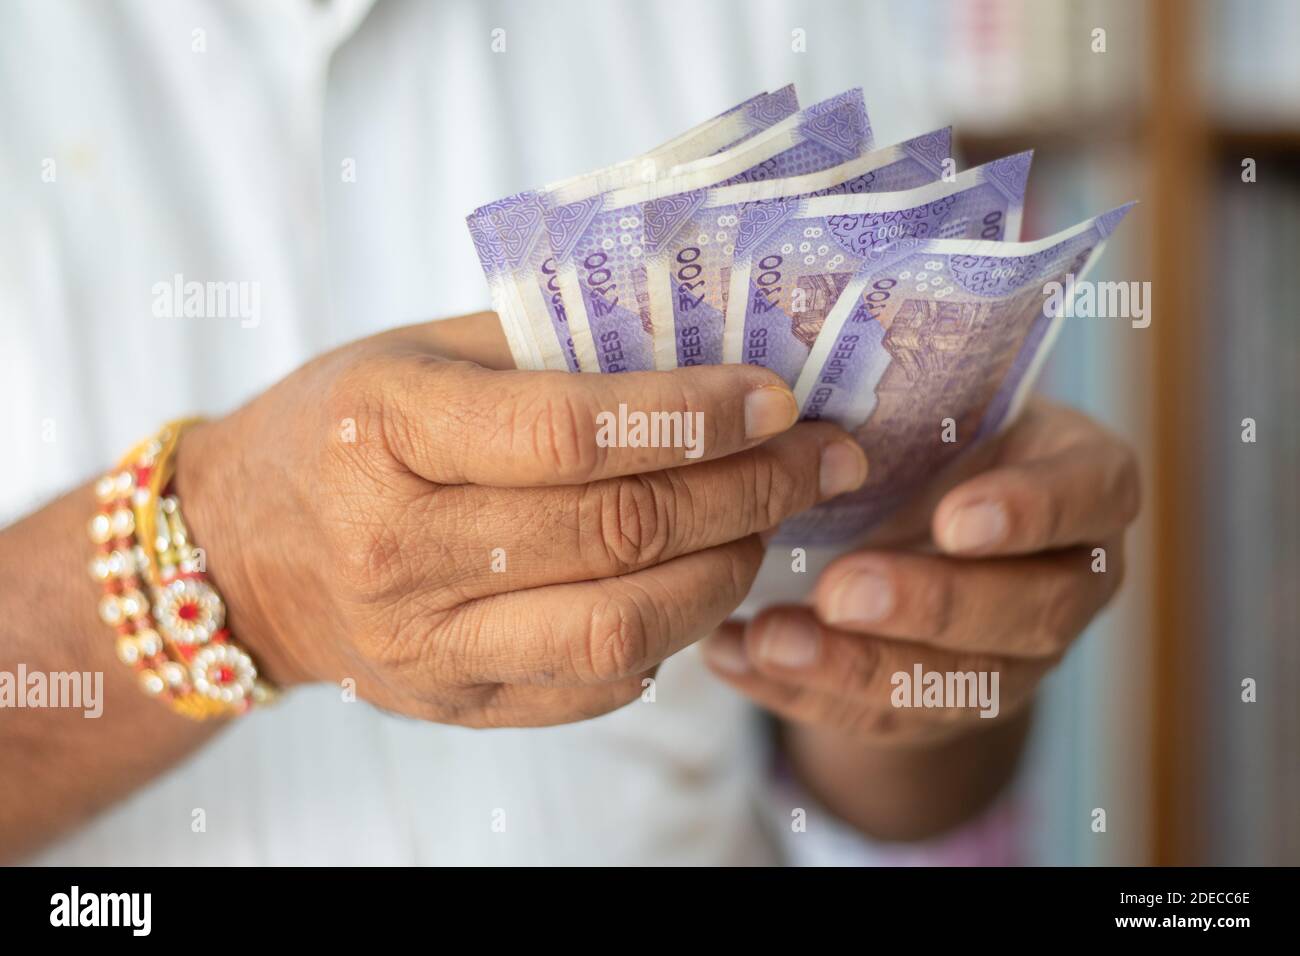 Close up hands Counting Indian Currency notes at cloth shop - Concept of back to business, profit, making money and reopen economy Stock Photo